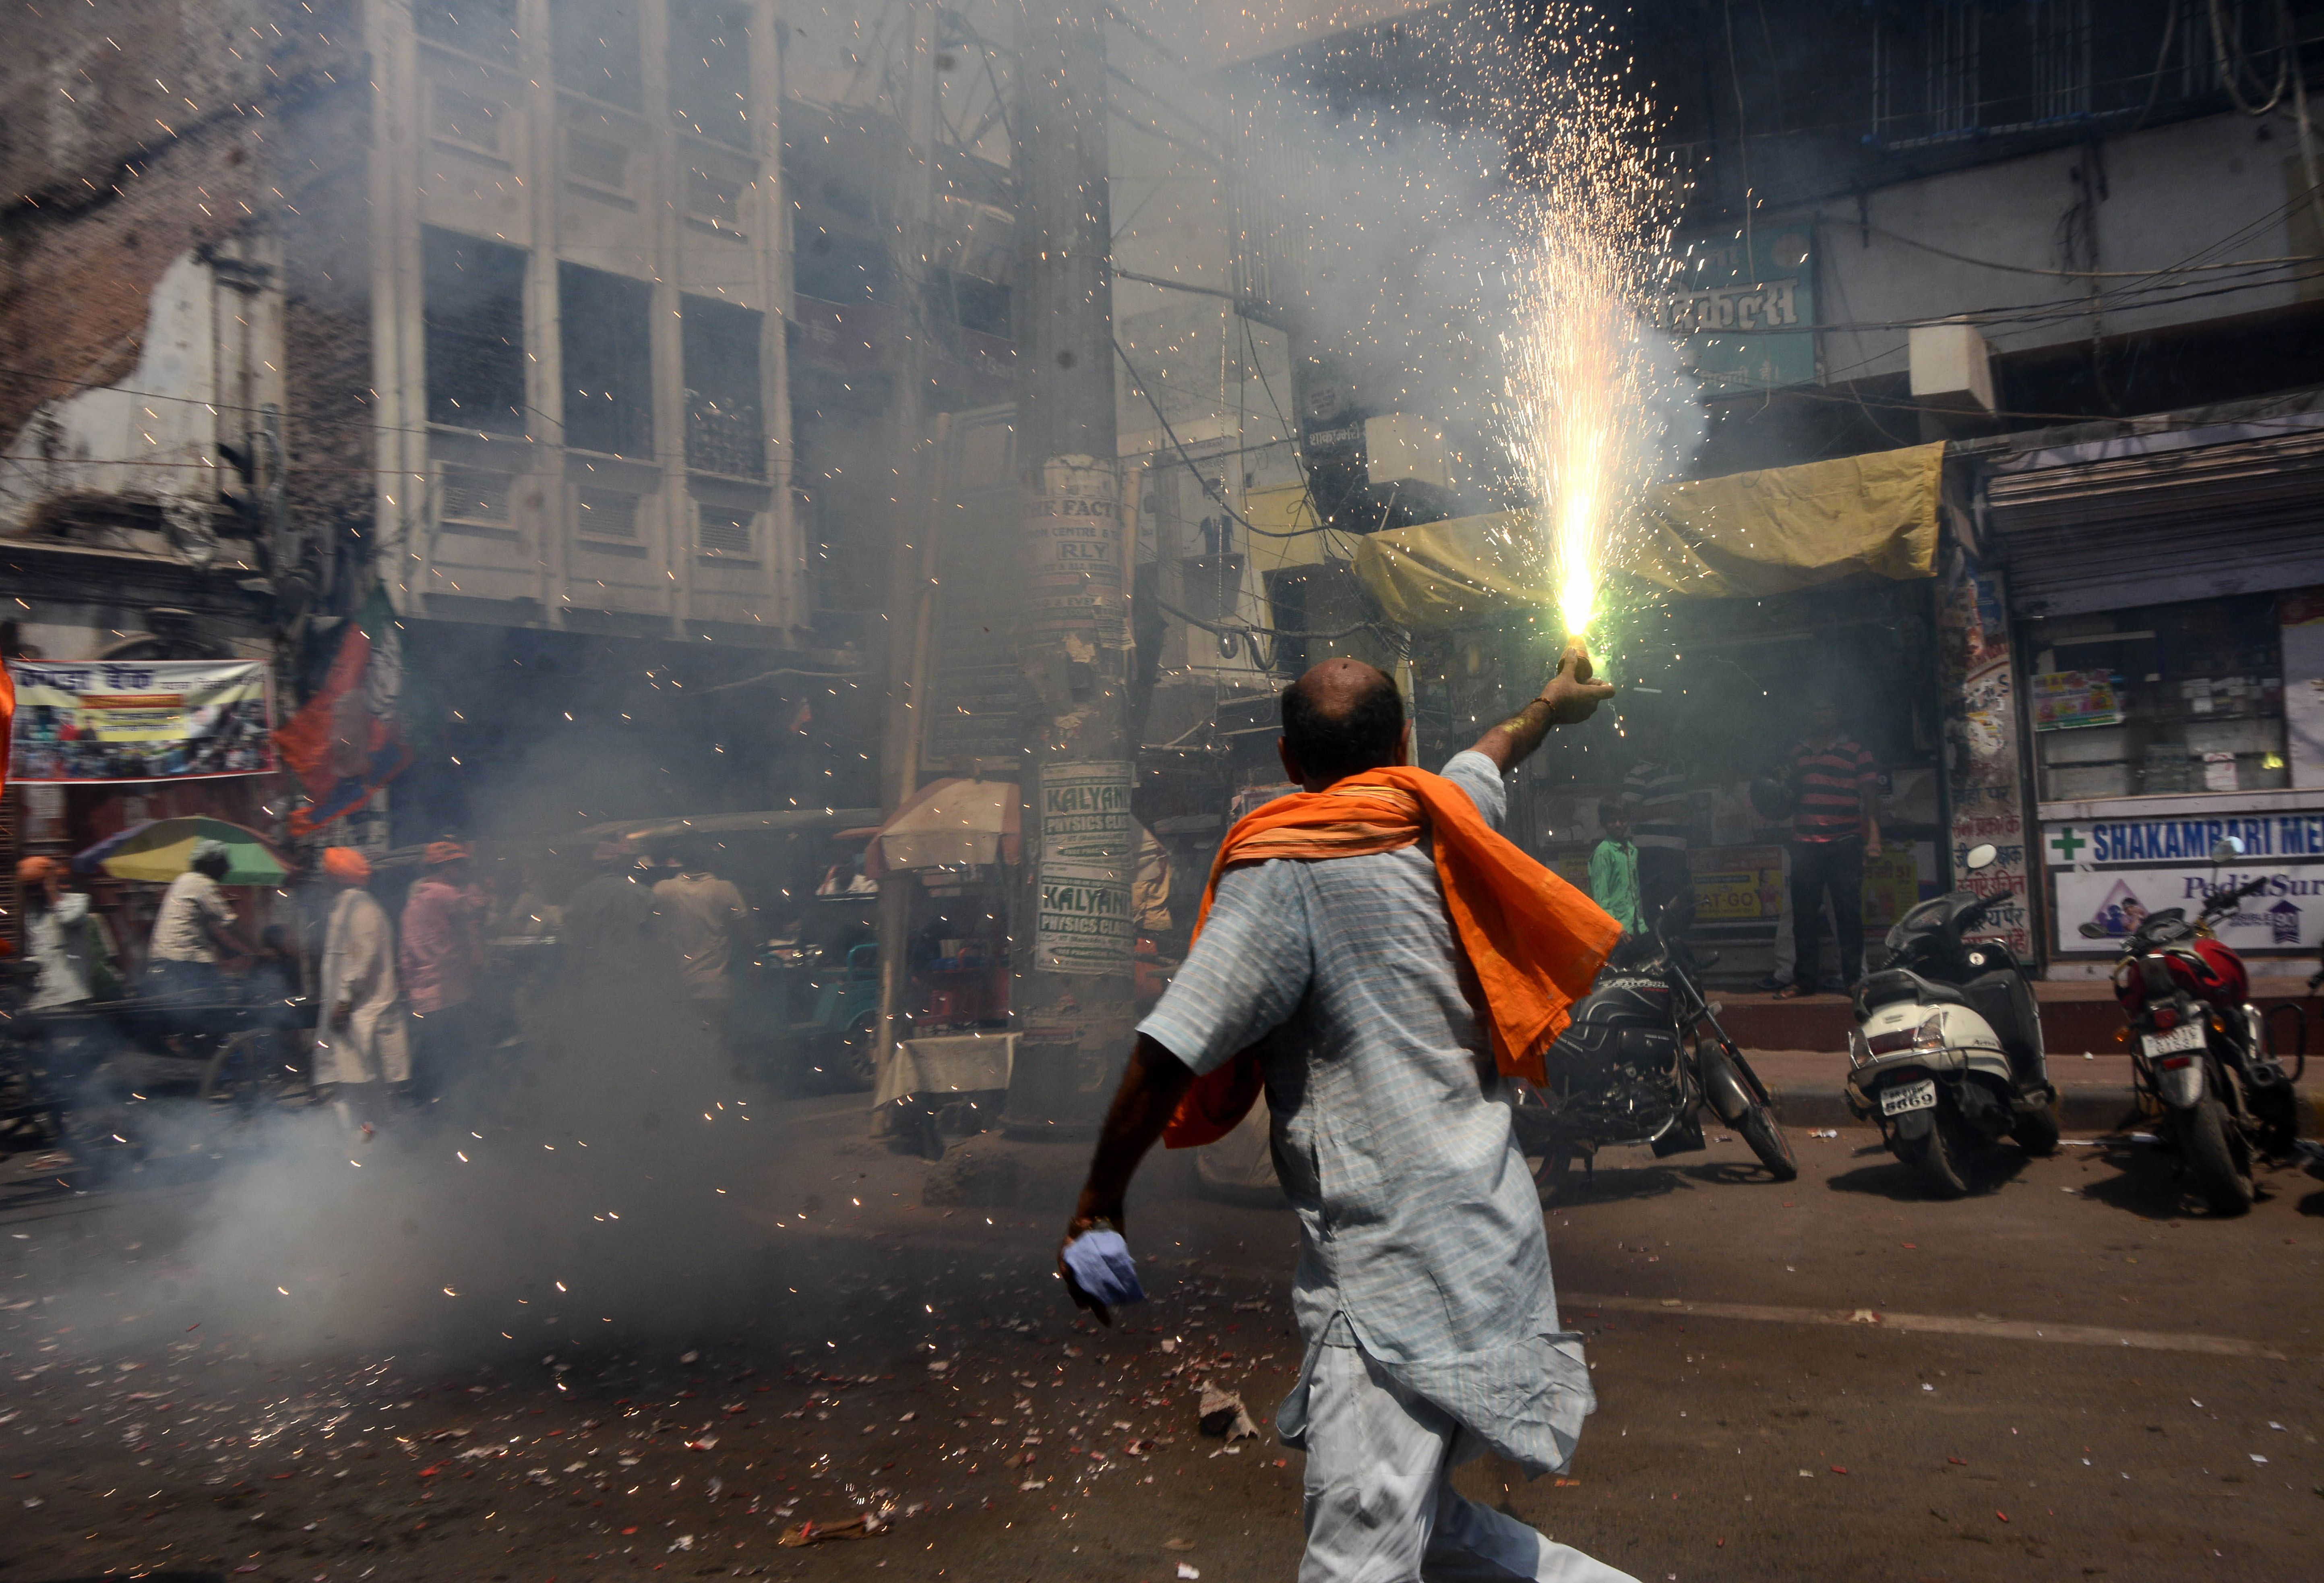 An Indian supporter of the Bharatiya Janata Party (BJP) lets off a firecracker.